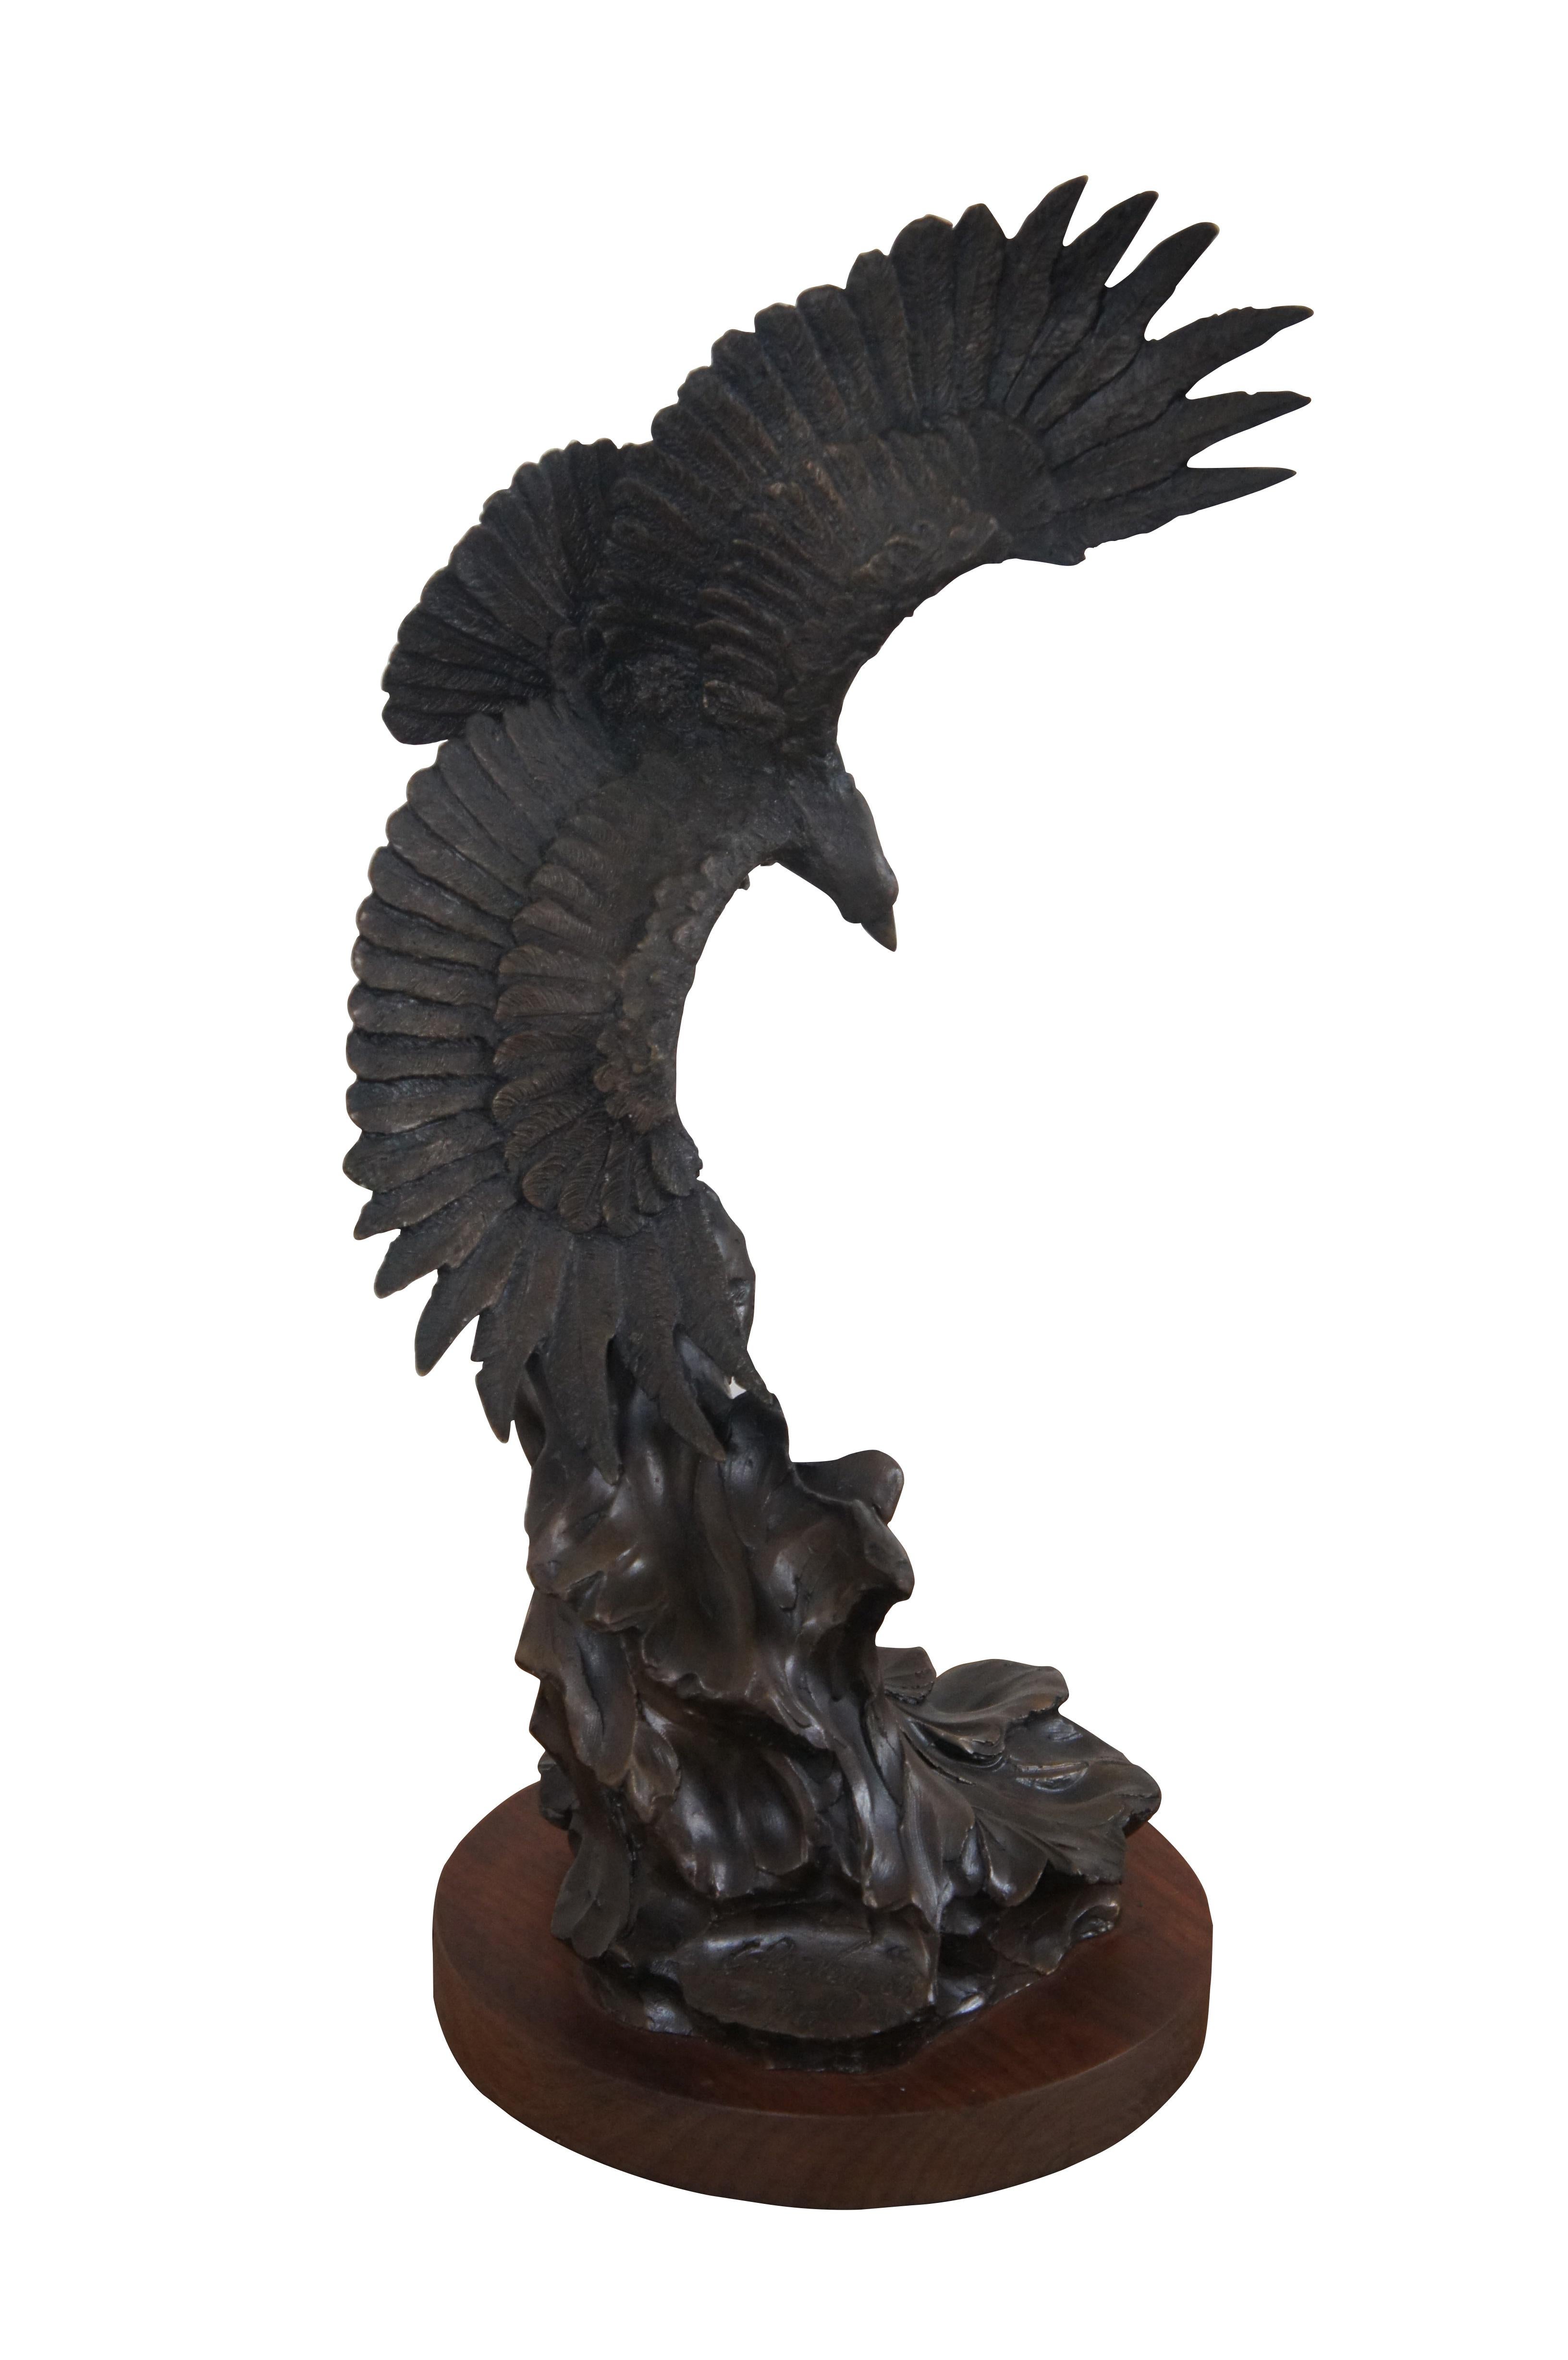 Vintage bronze sculpture depicting a realistically detailed American Bald Eagle / hawk / bird swooping over abstract waves, mounted on a round wood base. Signed on base C. Ra. Van 1983. Numbered 31/50.

Dimensions:
6.5